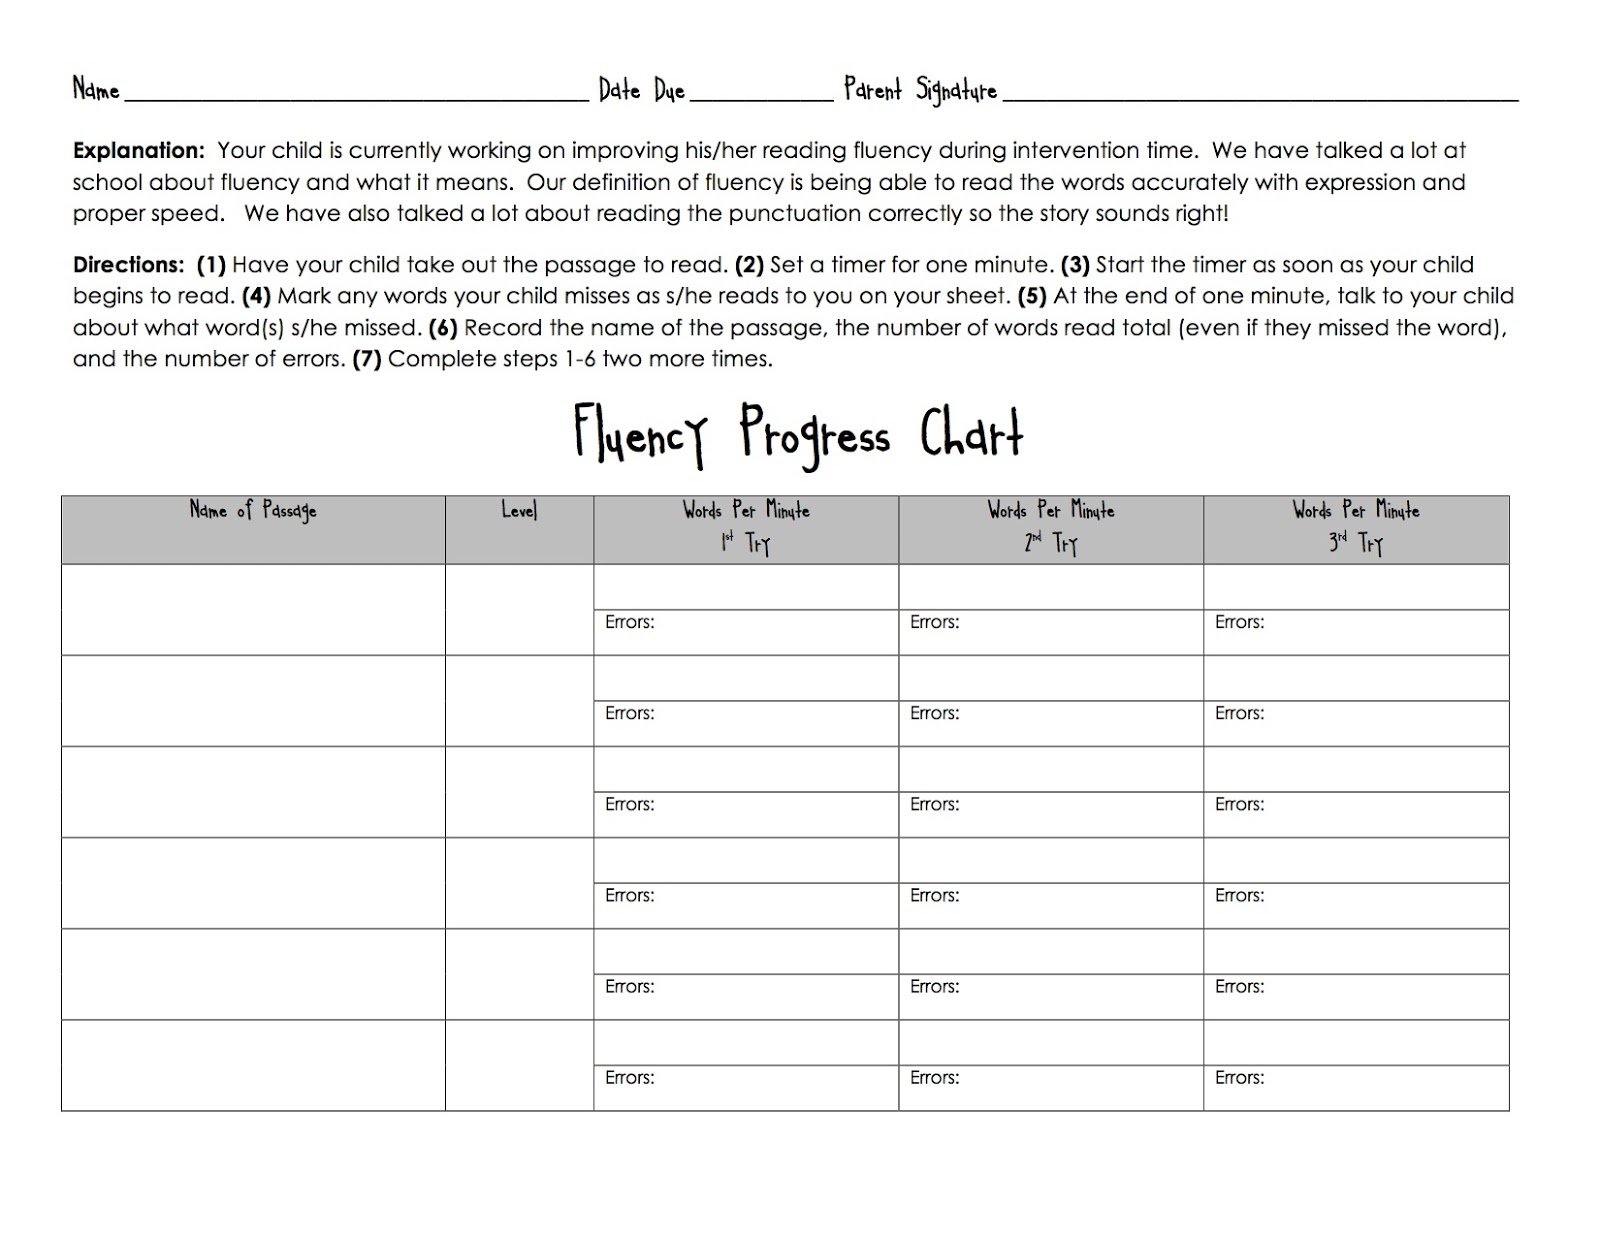 Homework Sheets For Kids To Print